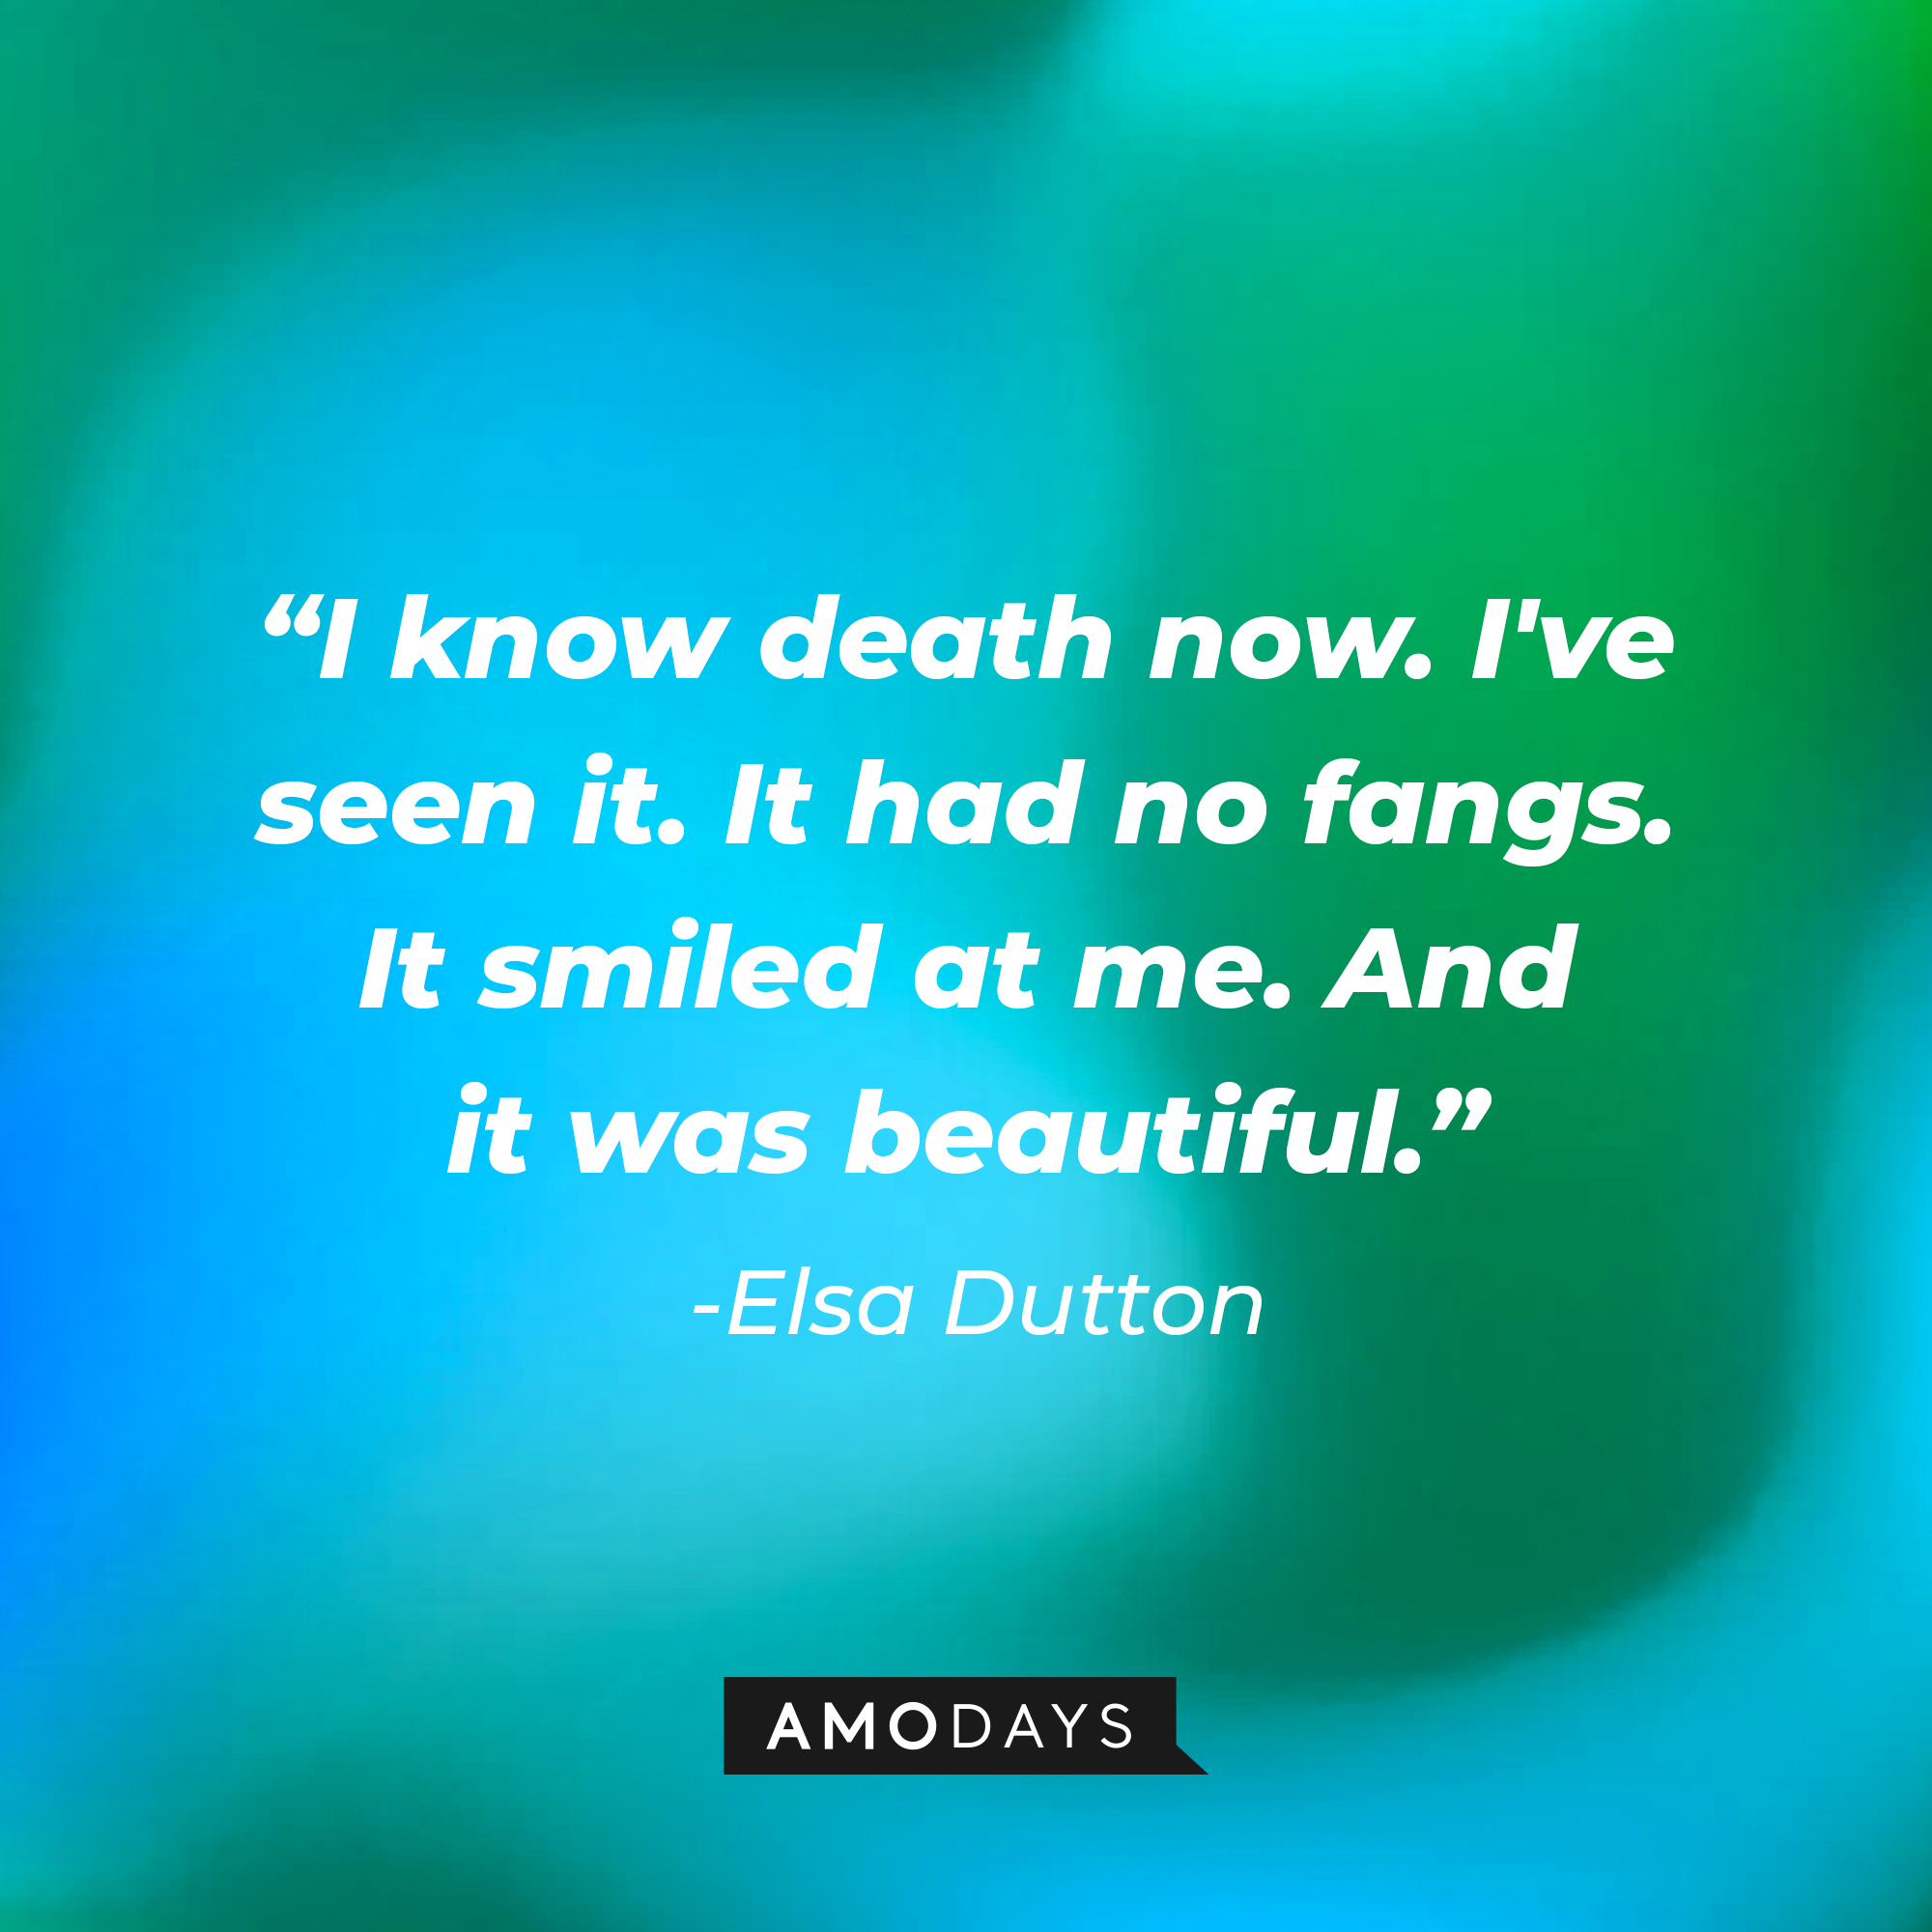 Elsa Dutton's quote: "I know death now. I've seen it. It had no fangs. It smiled at me. And it was beautiful." | Source: AmoDays